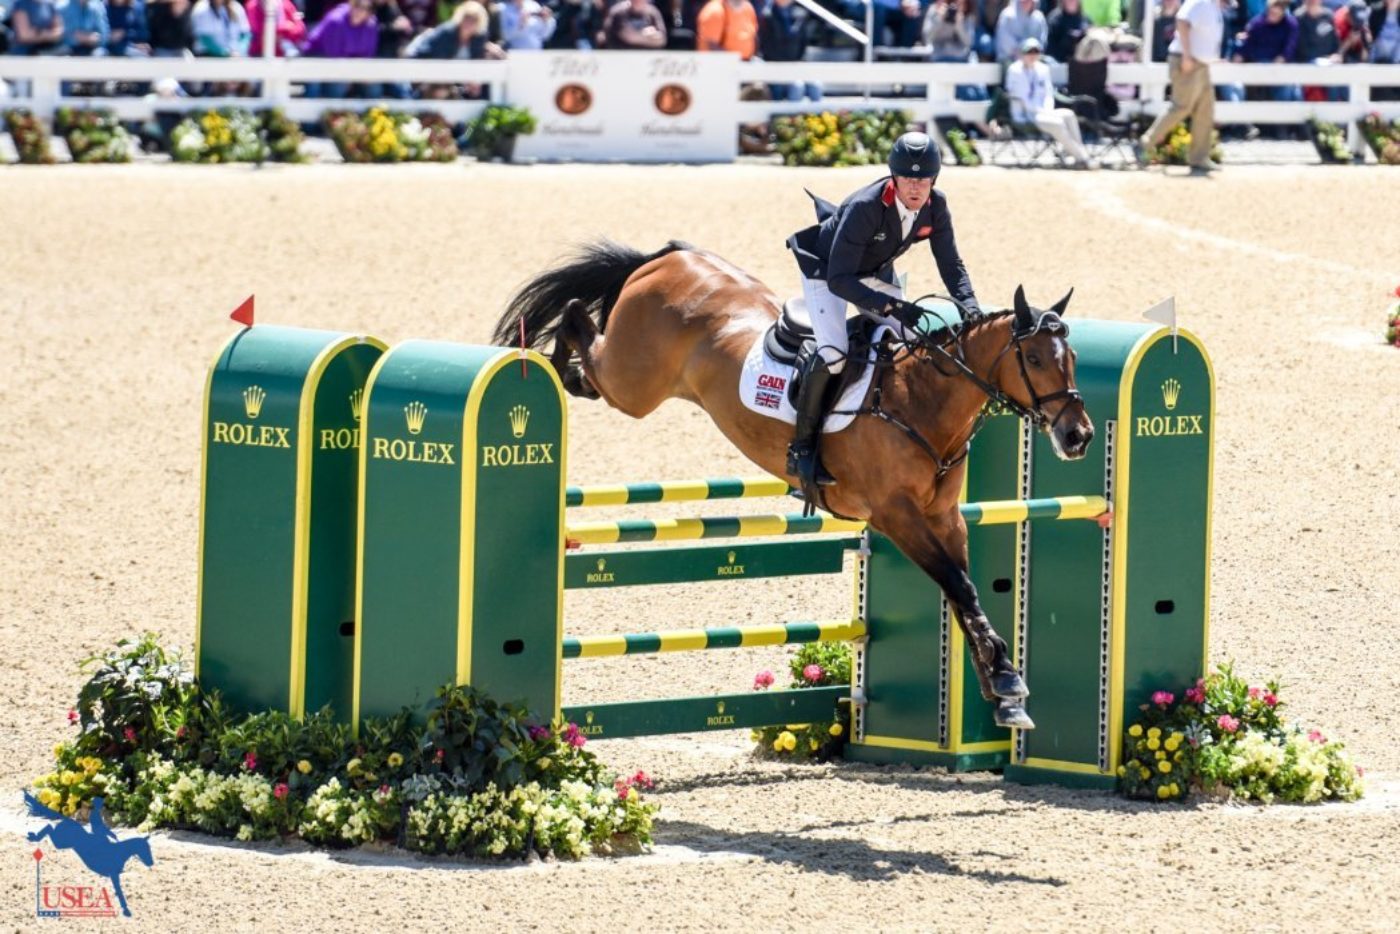 2018 Land Rover Kentucky Three-Day Event Show Jumping - USEA, United ...